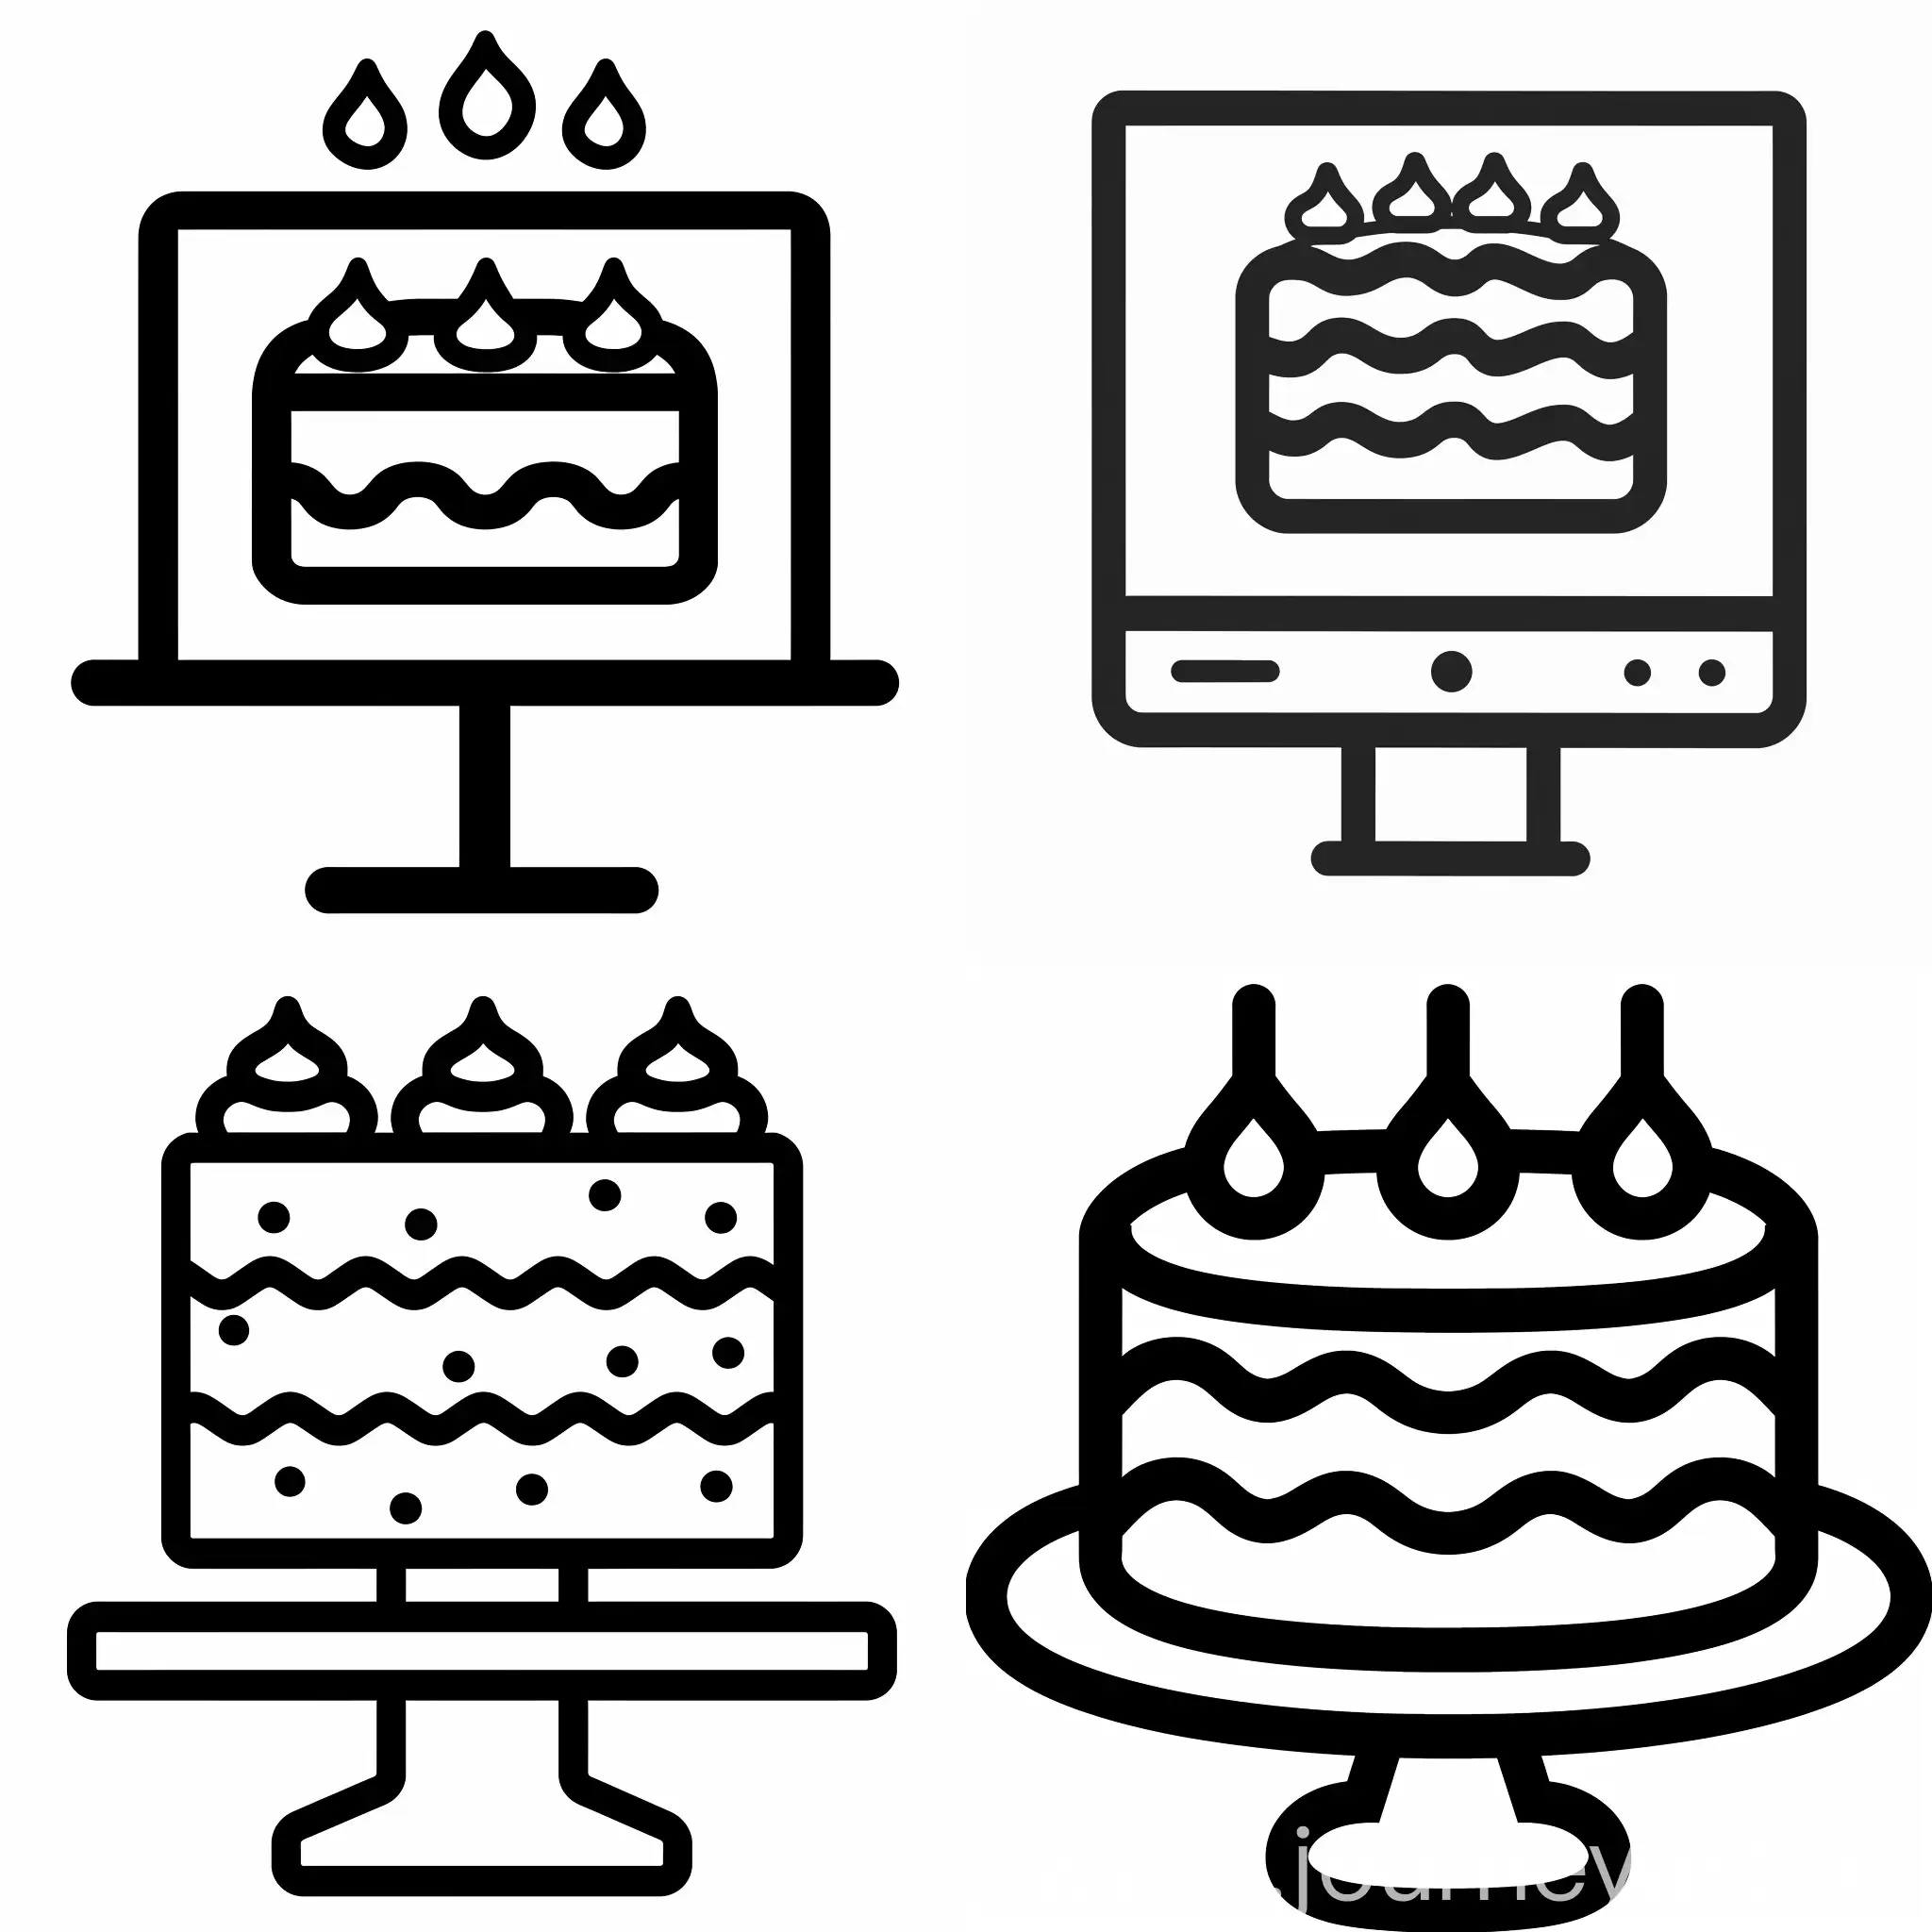 computer cake icon, allergen category icon, ux icon, black and white, black outline on white background